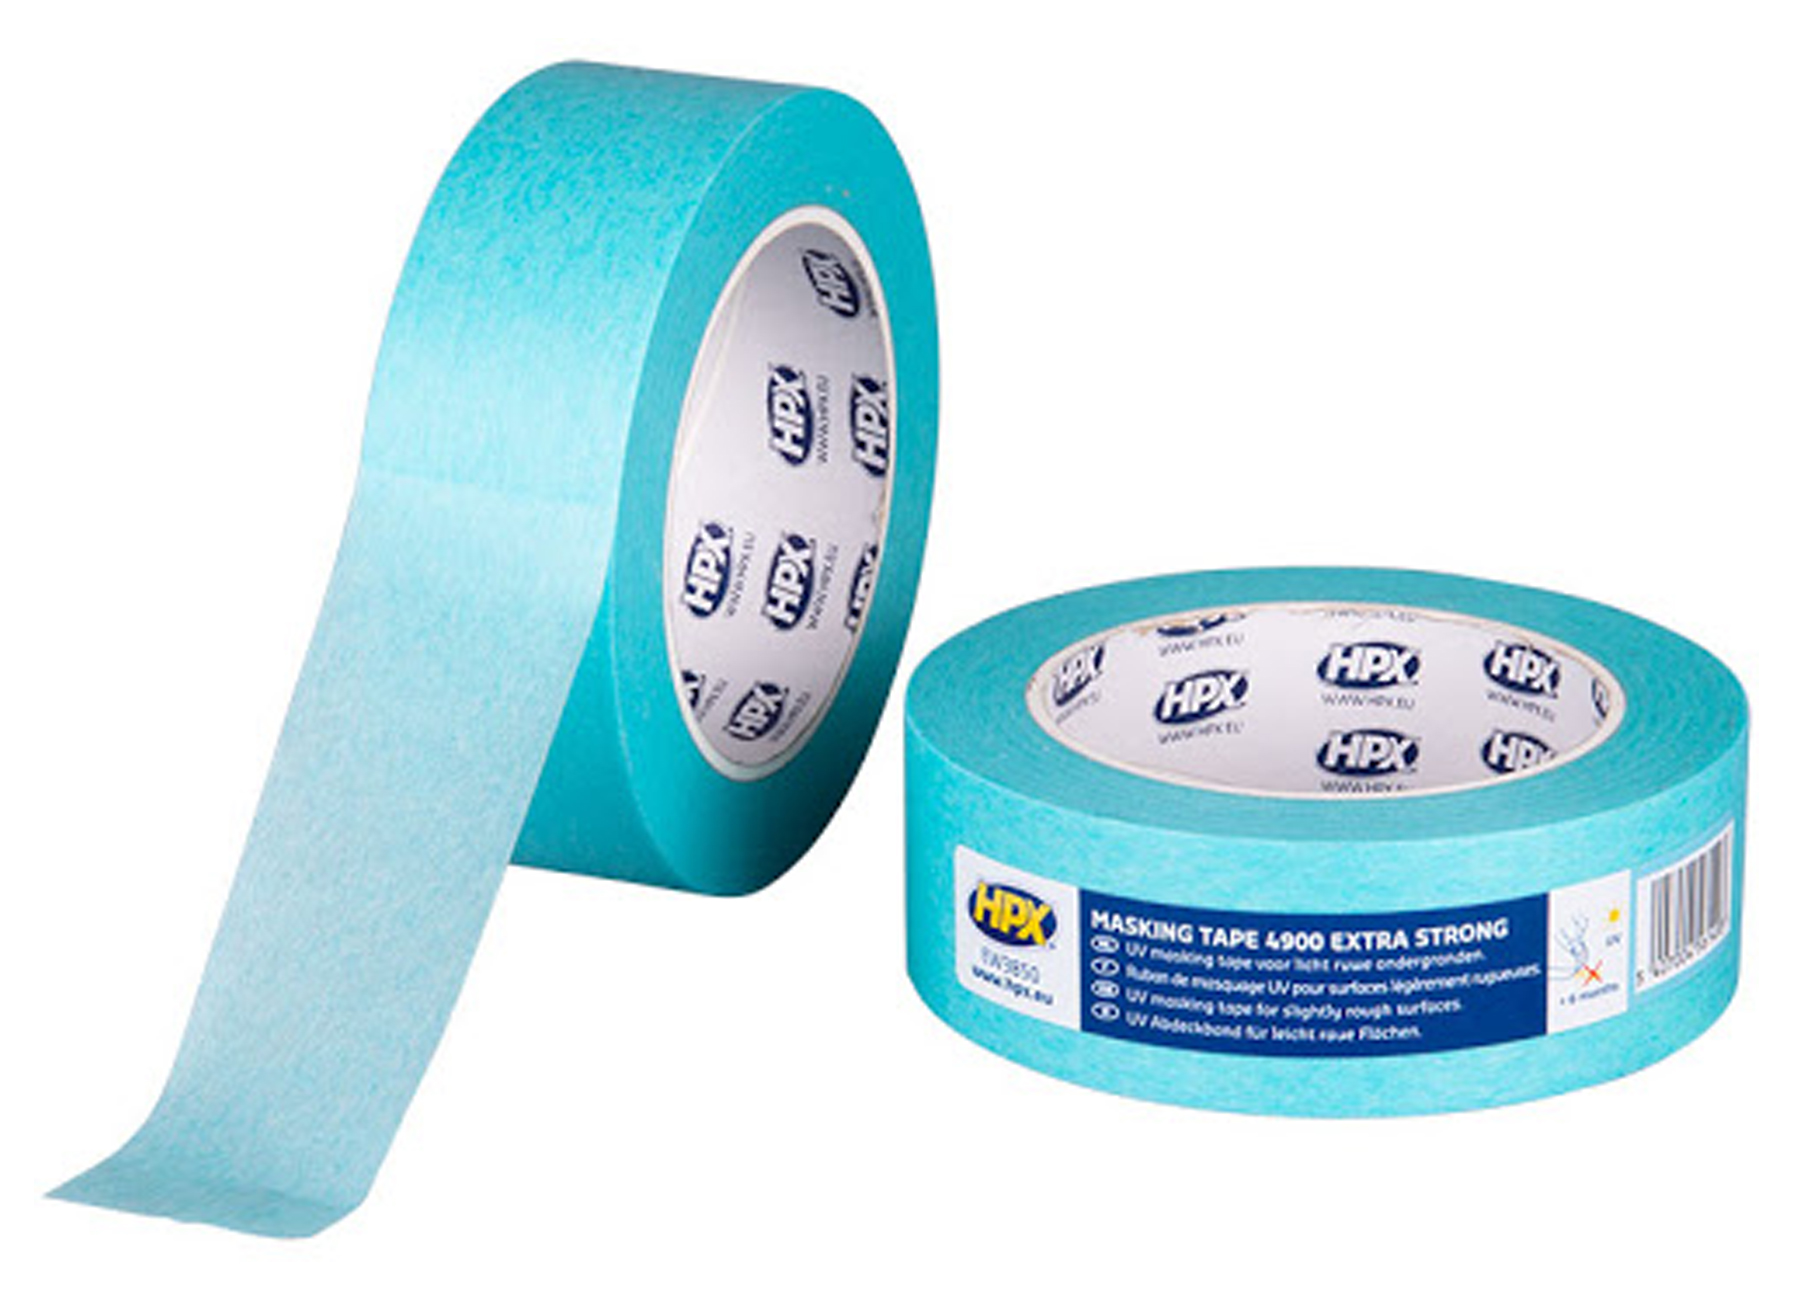 HPX MASKING TAPE EXTRA STRONG 4900